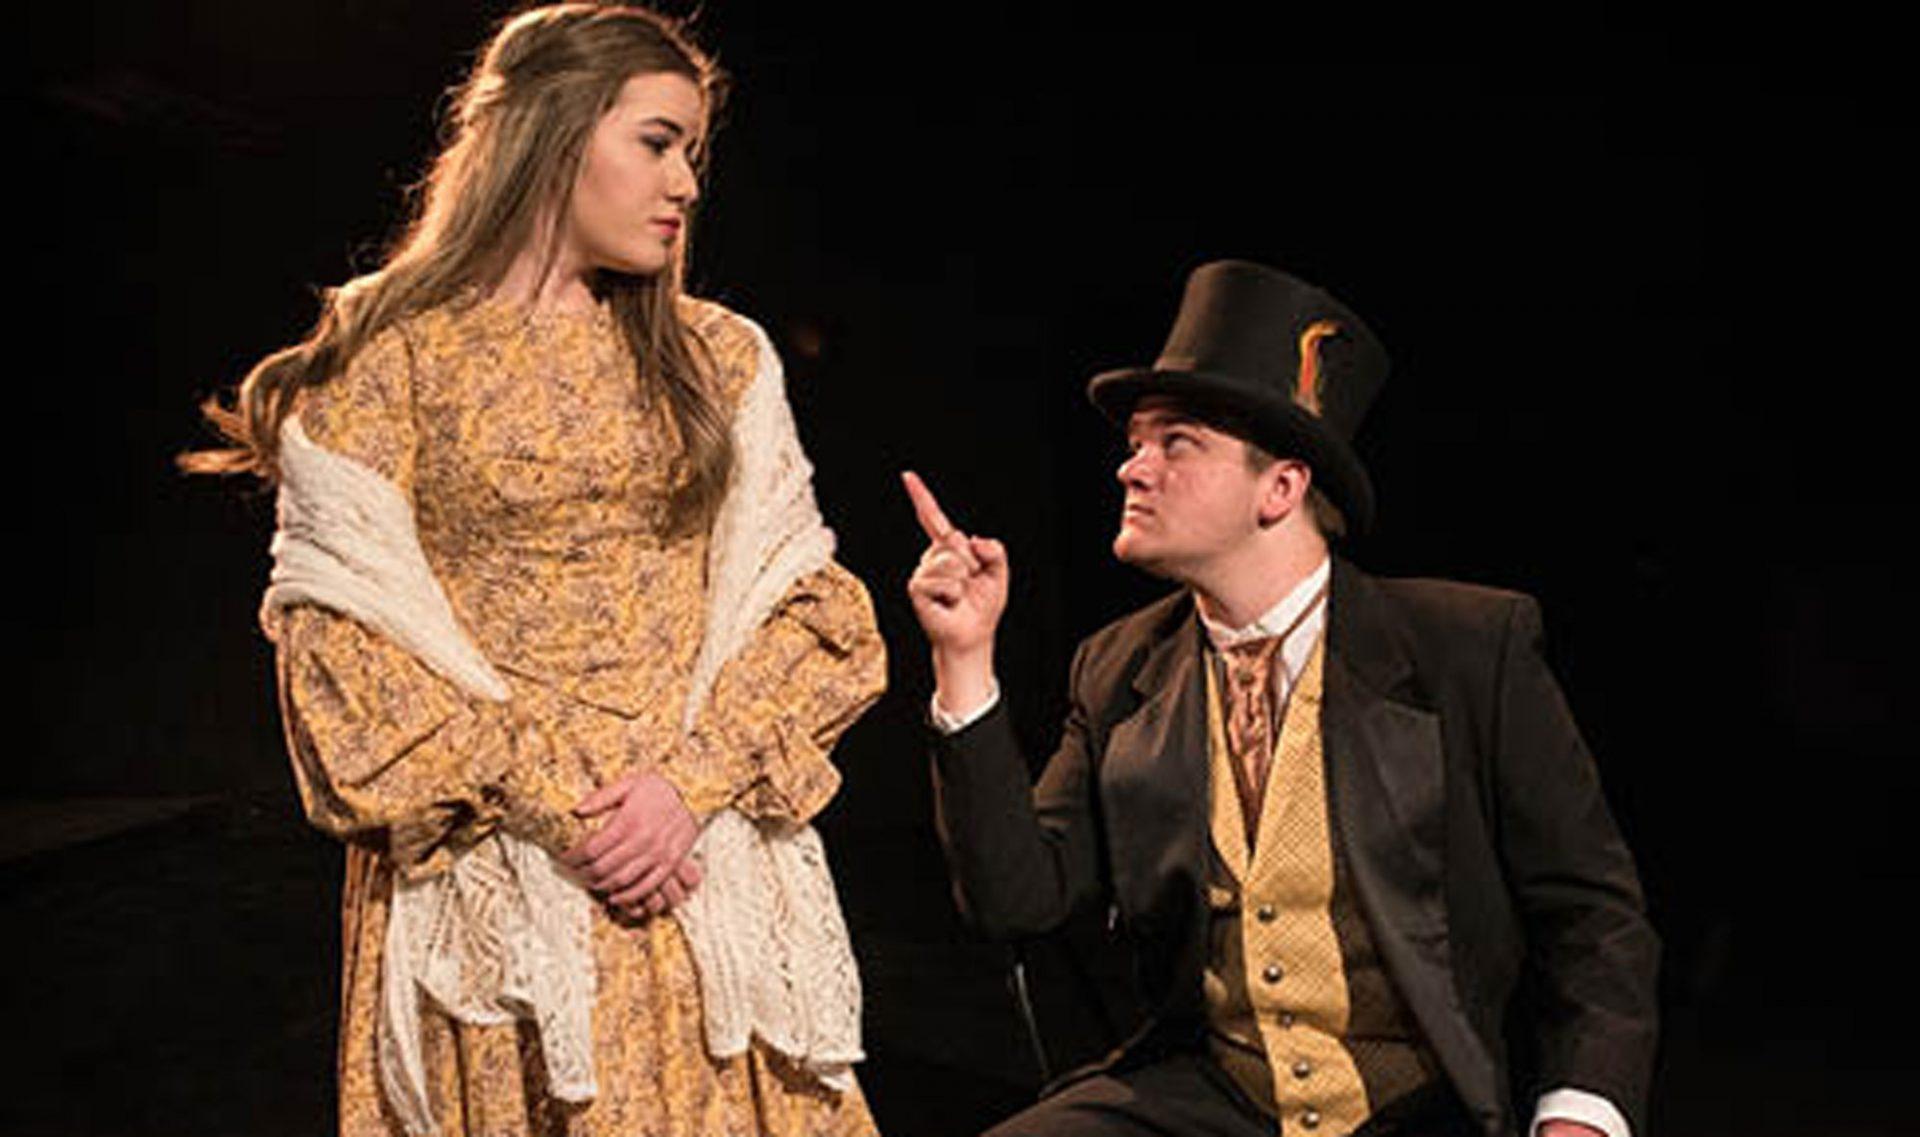 Sophomore Richard Moore portraying Judge Turpin and Sophie Weiner portraying Johanna in the upcoming play Sweeney Todd. The opening night is this Friday at 7 p.m. at the Schaefer Center.  